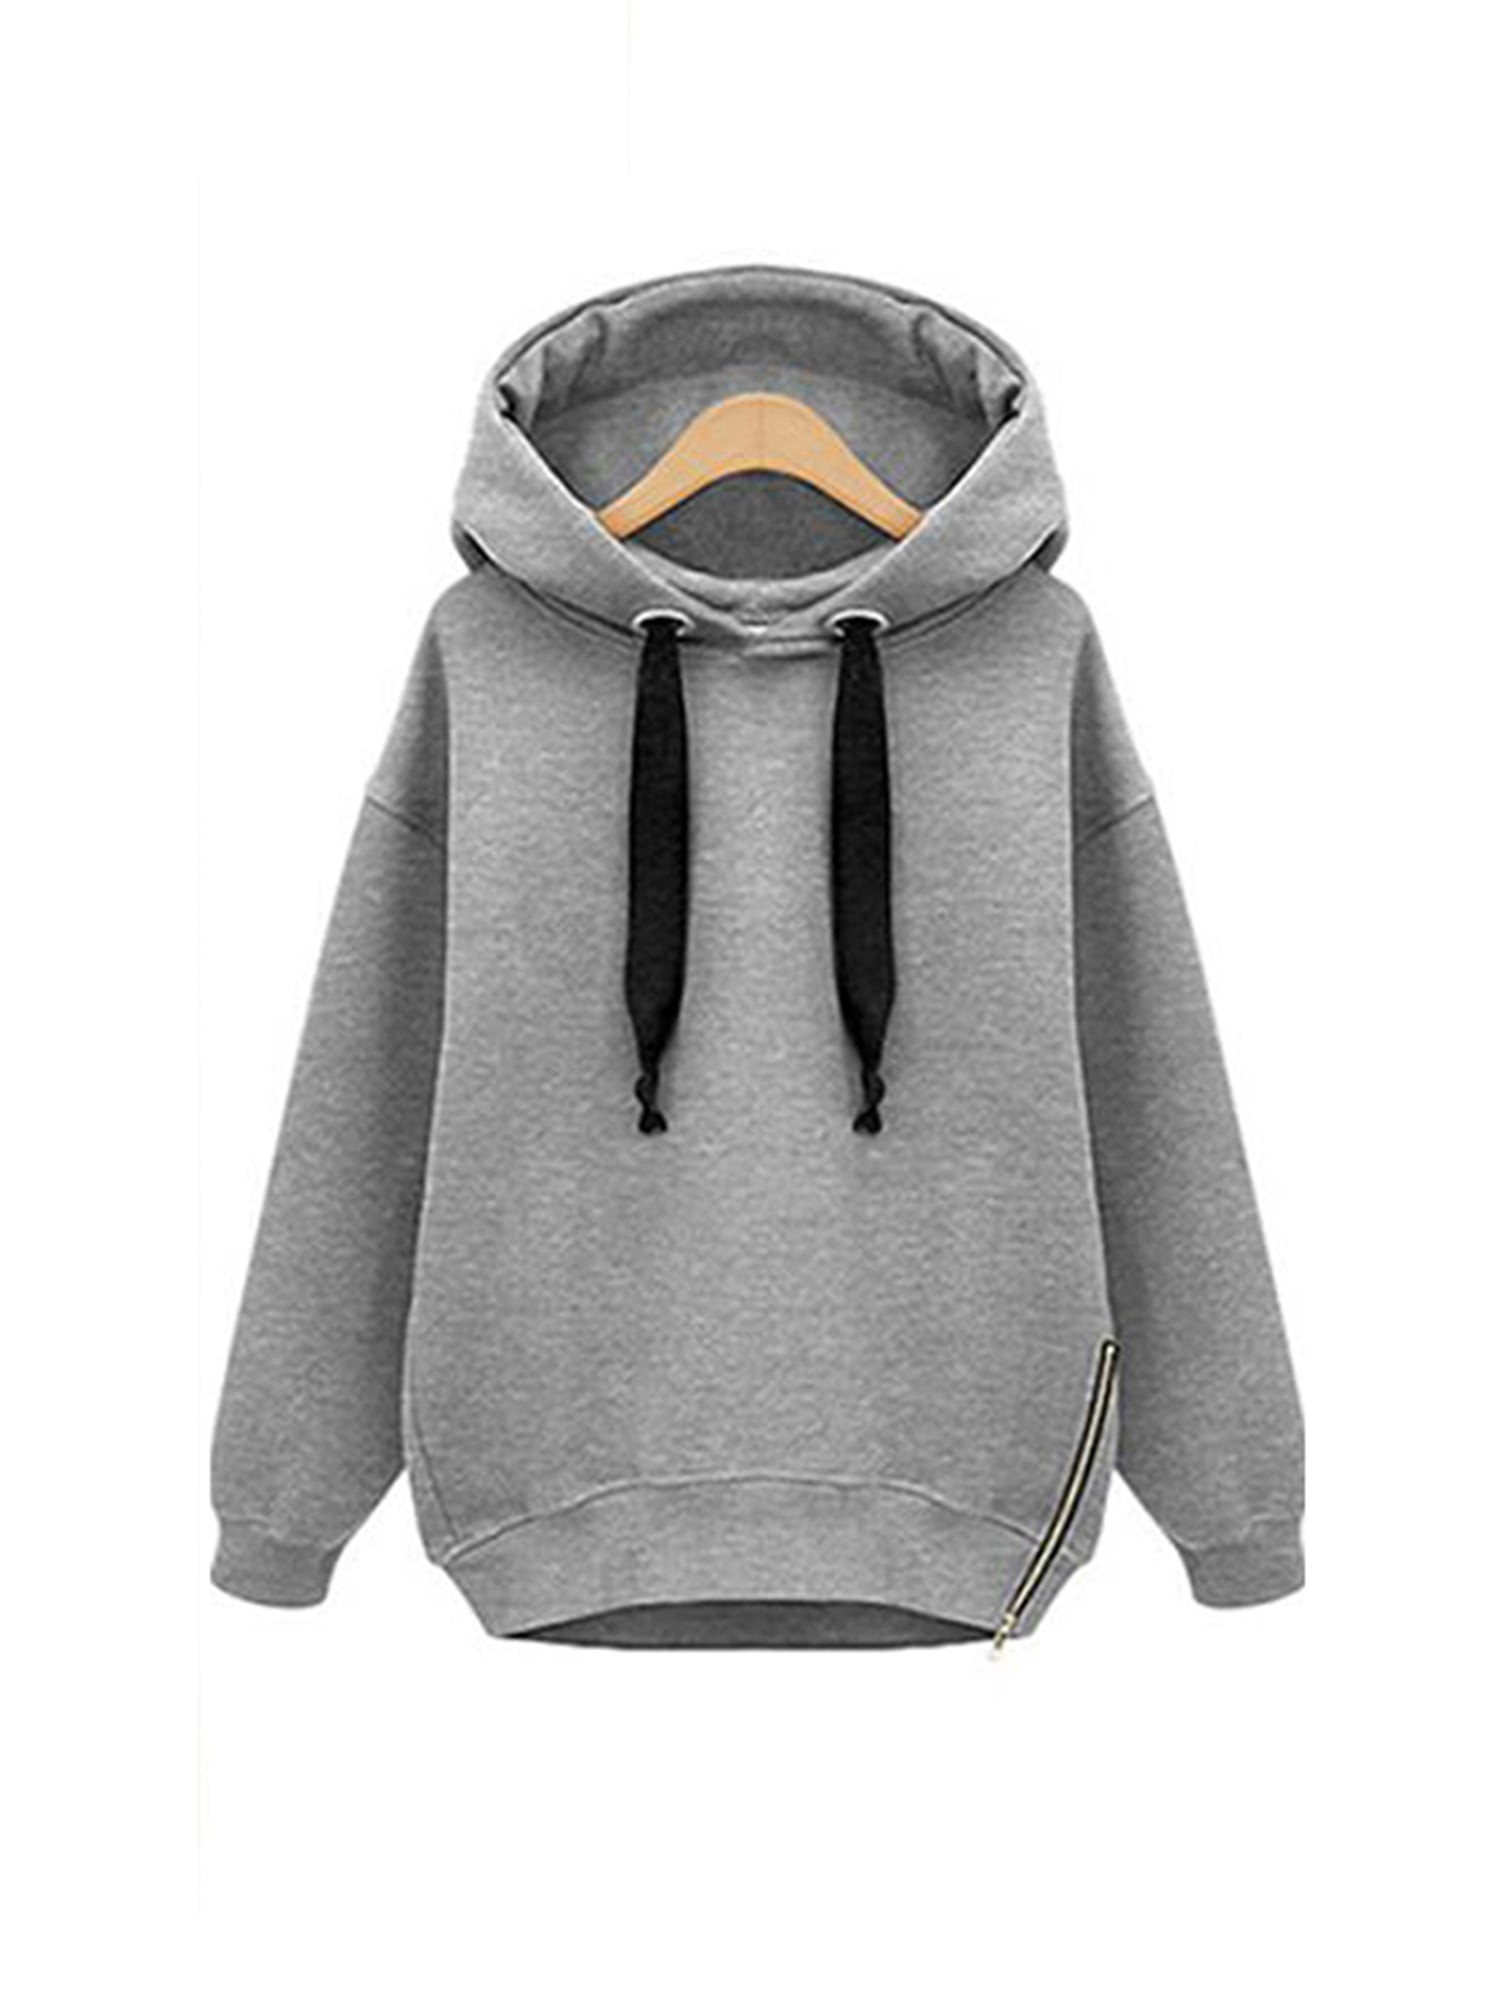 SELX Women Long Sleeve Pullover Casual Drawstring Pure Color Sweatshirts Hooded Tops